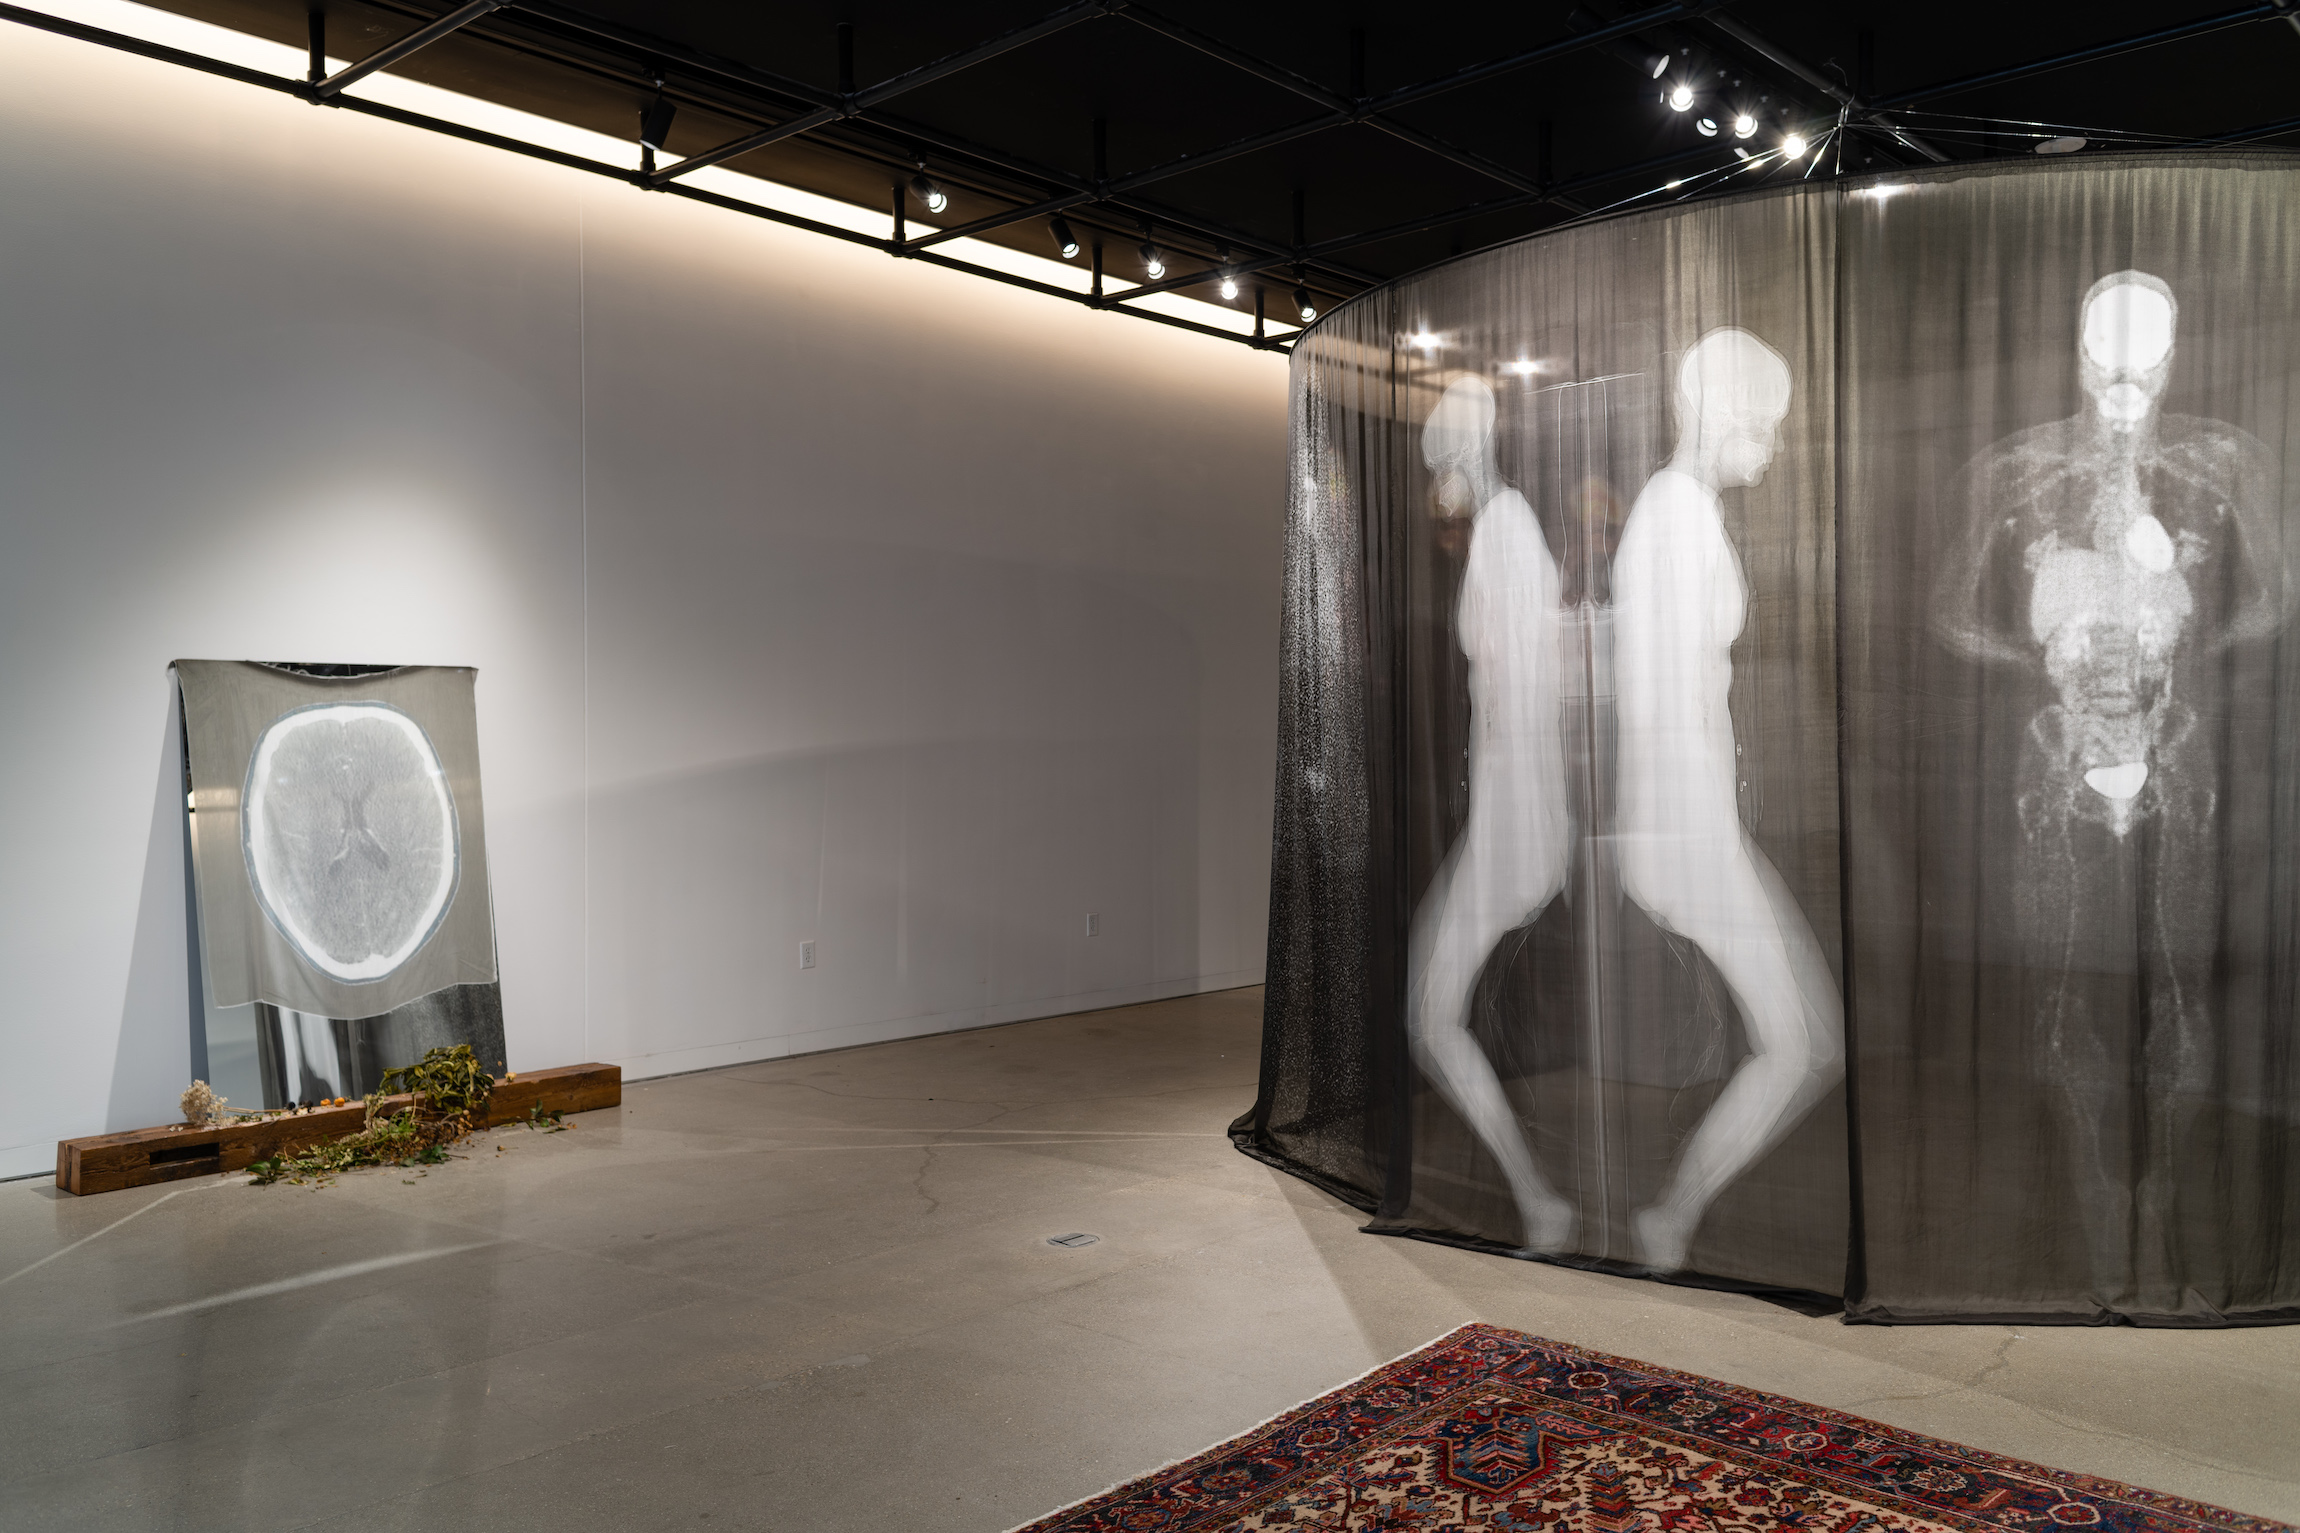 "Occurring Through Consciousness," and "Monolith," installation artwork from Alex Donnelly's Master of Fine Arts exhibition Vital Winds at the Art Lofts Gallery, University of Wisconsin-Madison. Photography by Kyle Herrera.